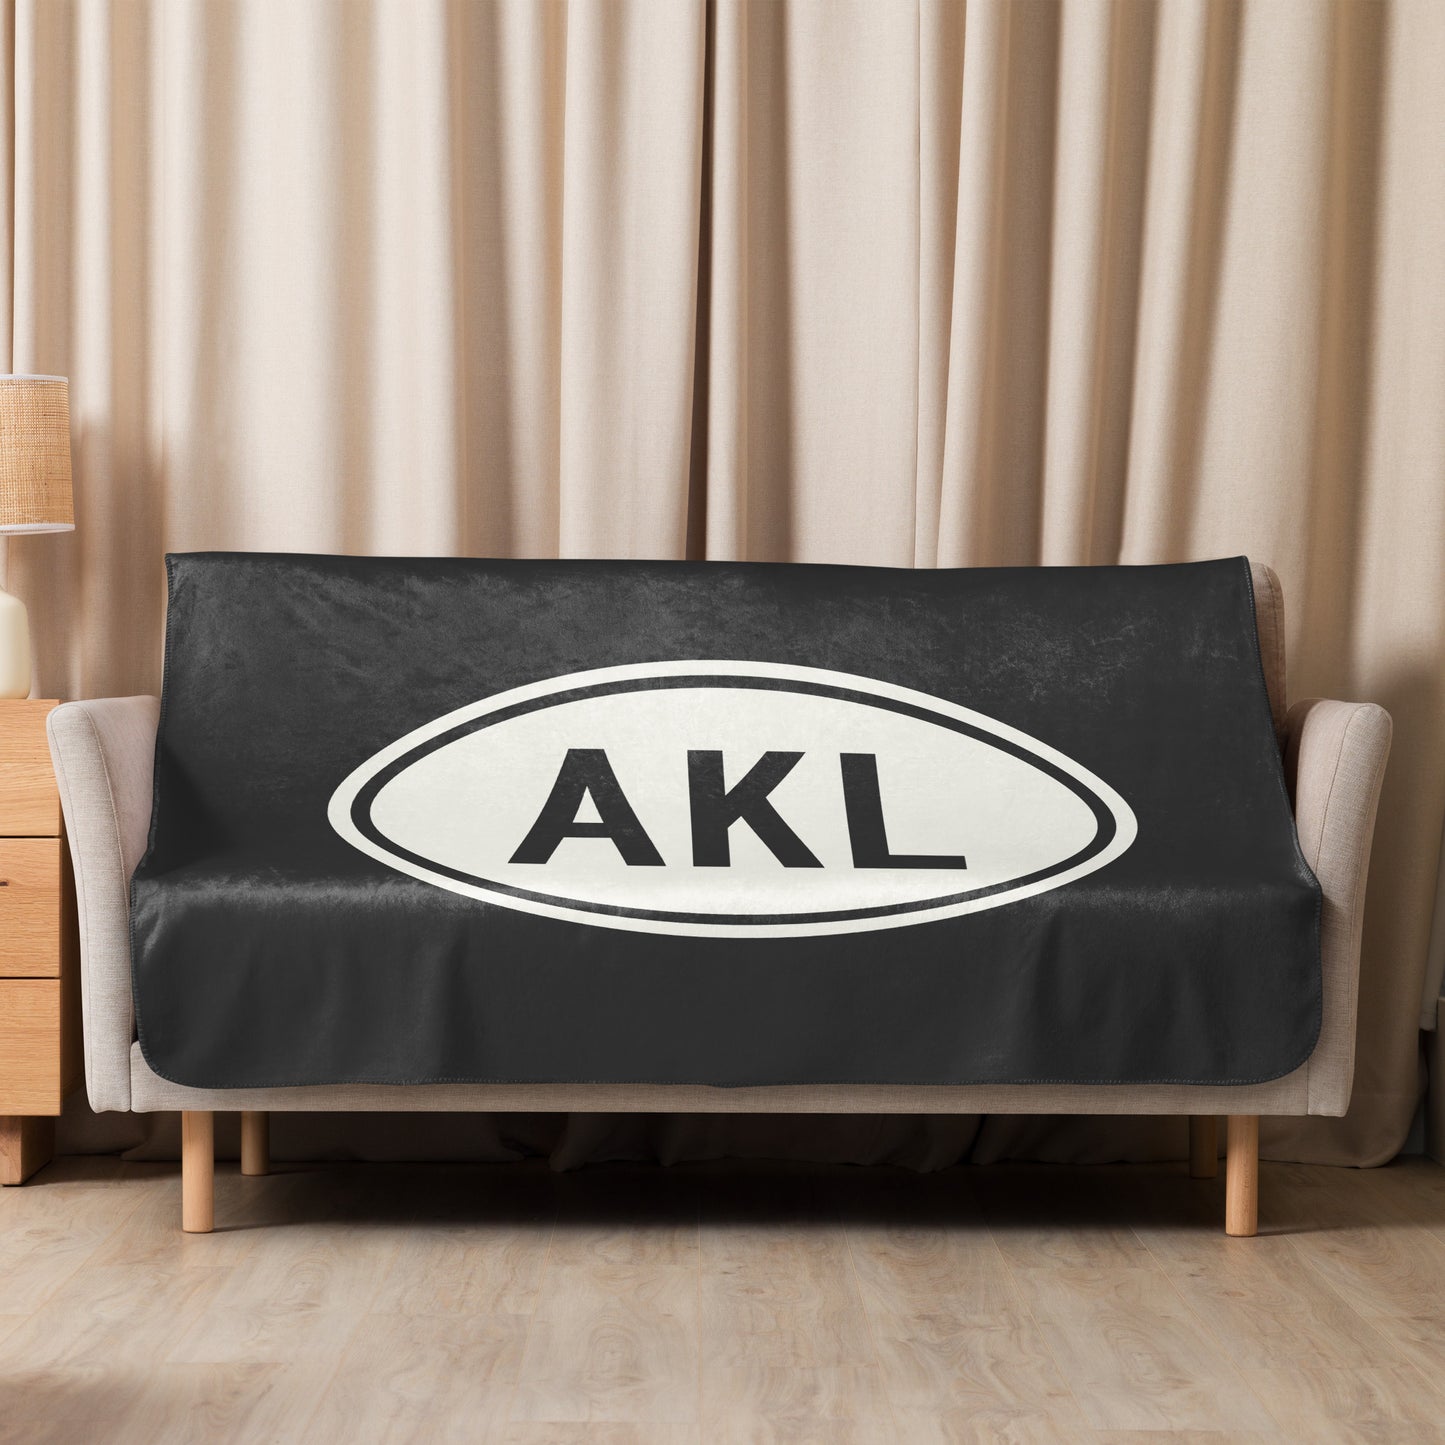 Unique Travel Gift Sherpa Blanket - White Oval • AKL Auckland • YHM Designs - Image 07